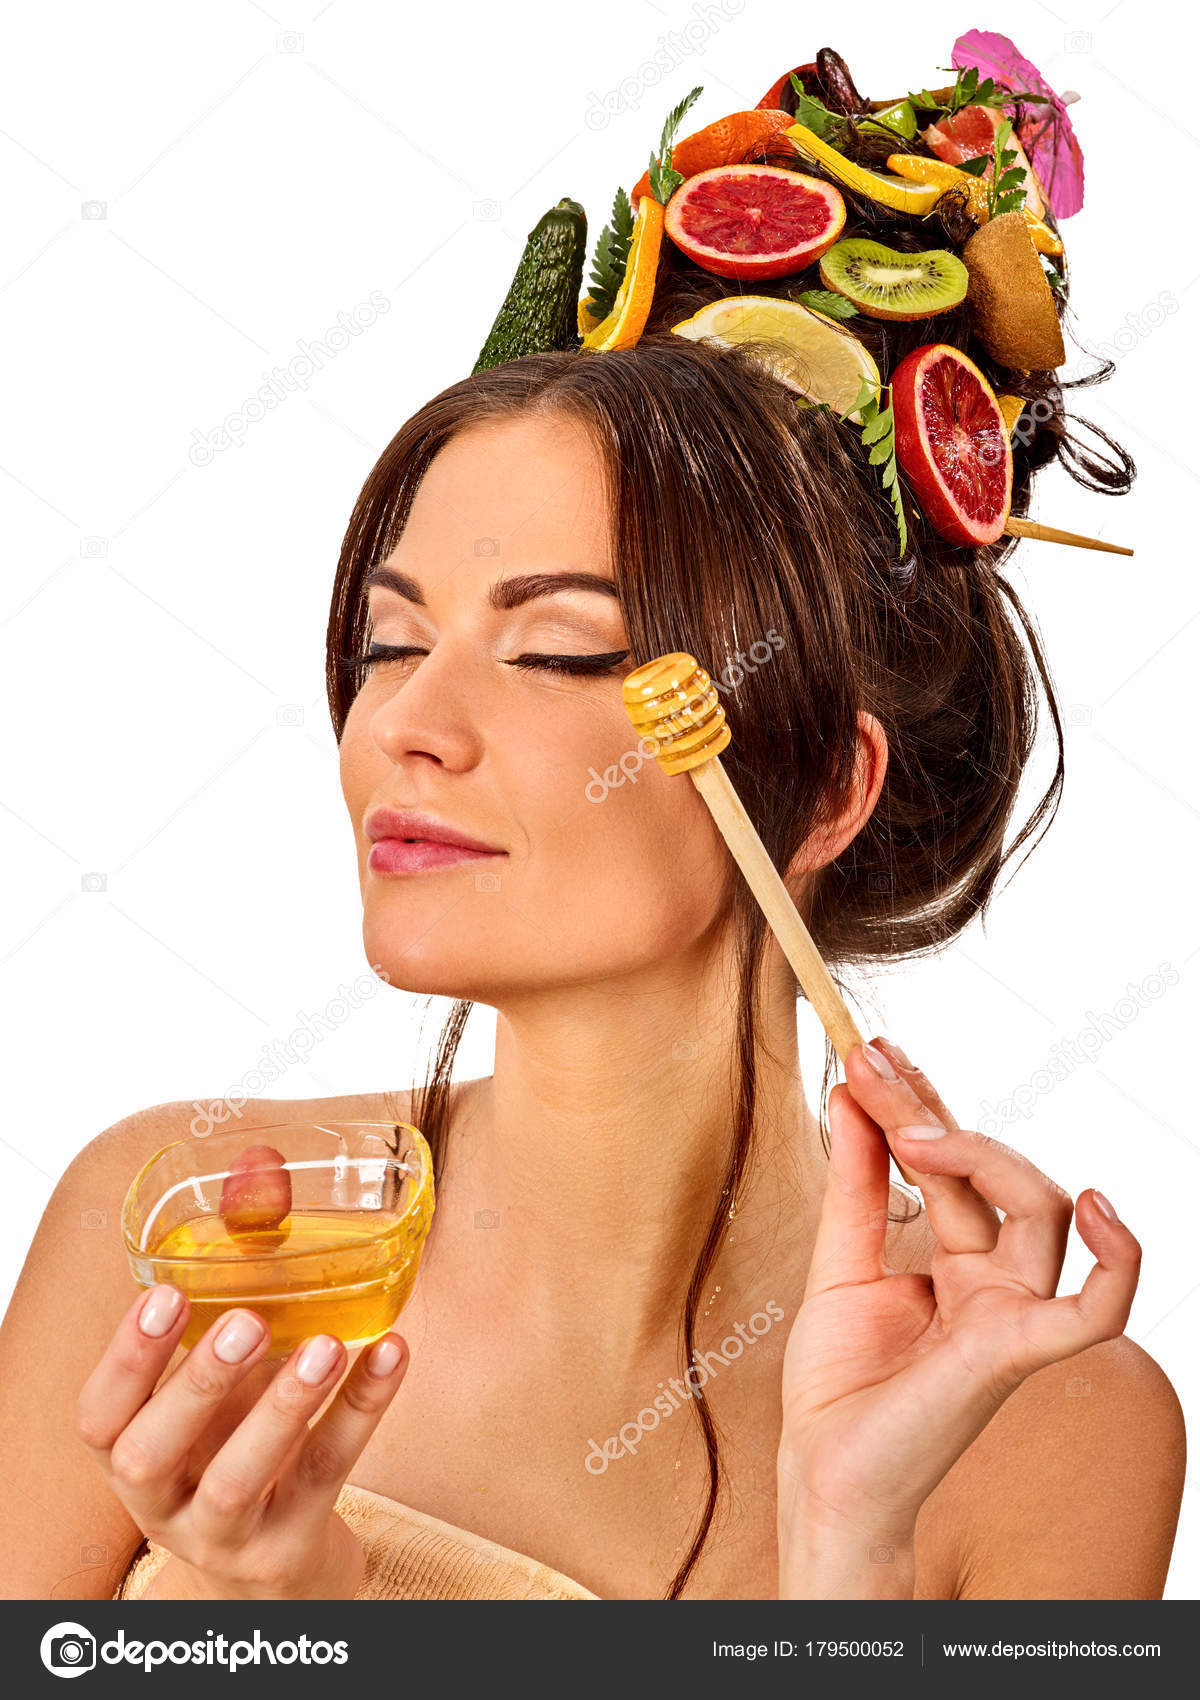 Download Honey Face Mask Stock Photos Royalty Free Honey Face Mask Images Depositphotos Yellowimages Mockups